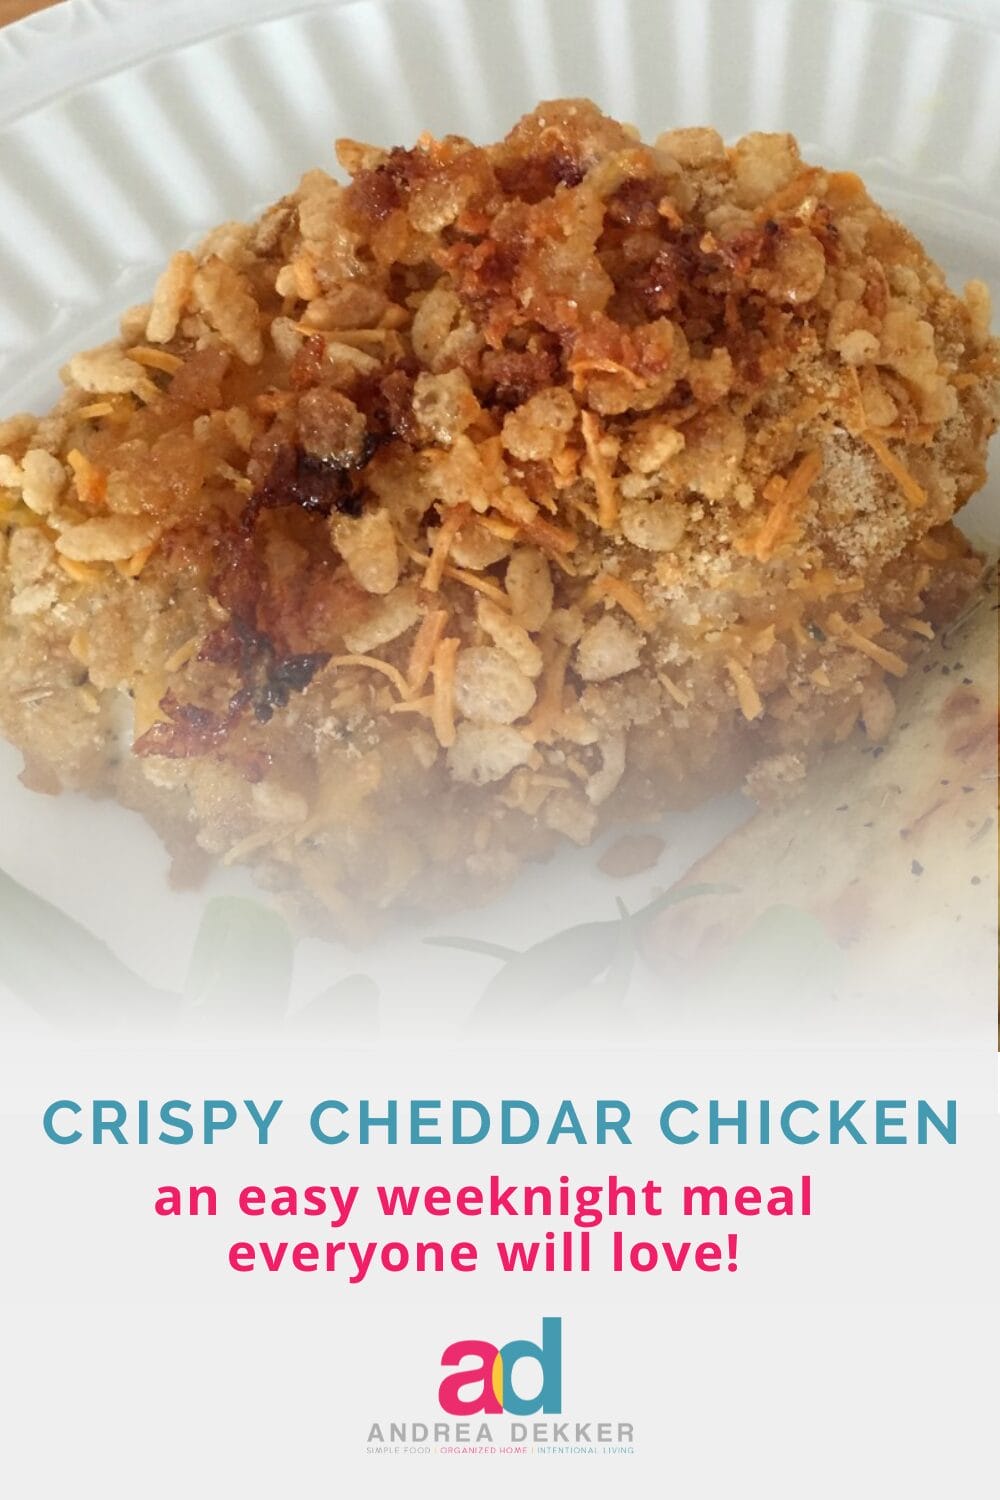 This is one of our family's favorite chicken recipes -- made with simple ingredients, minimal prep work, and an almost-tastes-like-fried-chicken crispy shell! via @andreadekker